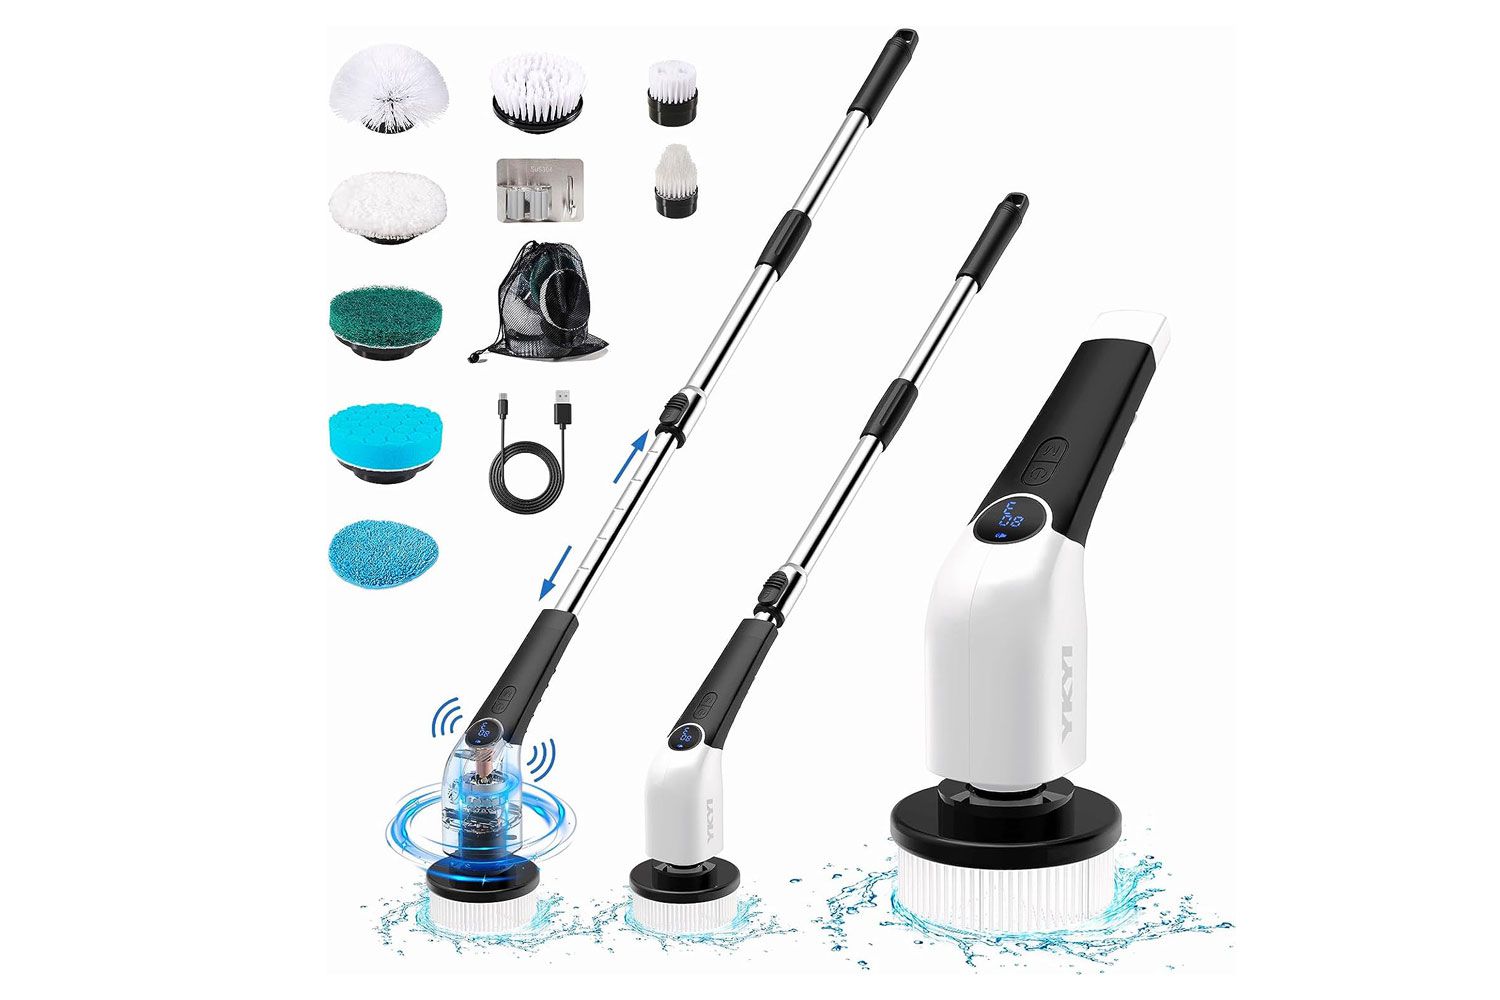 YKYI ELECTRIC SPIN SCRUBBER CORDLESS CLEANING BRUSH